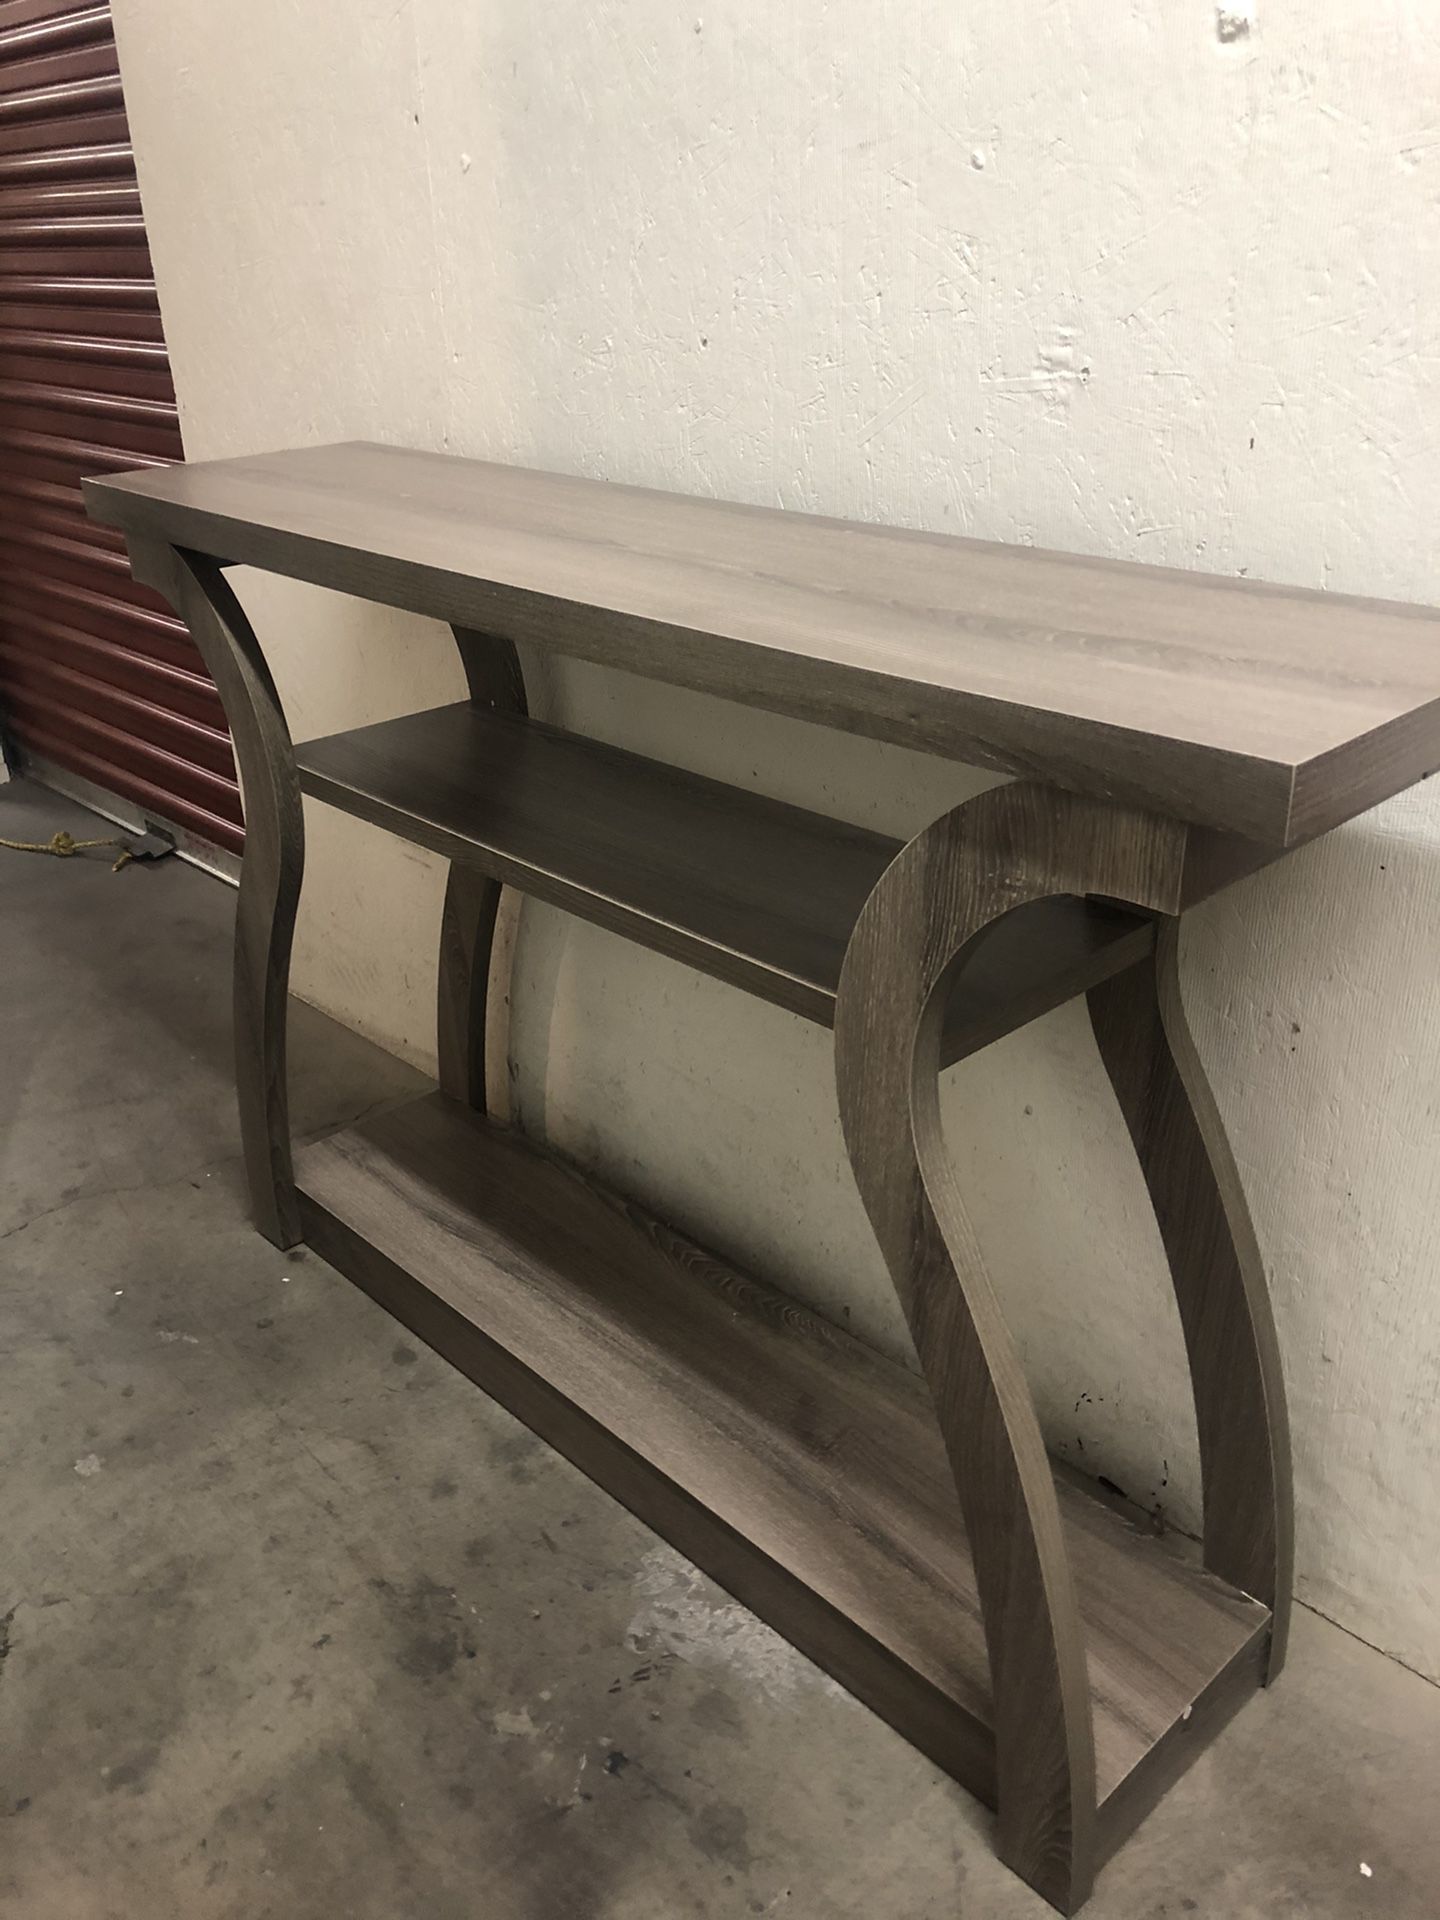 Consol table (new and assembled)